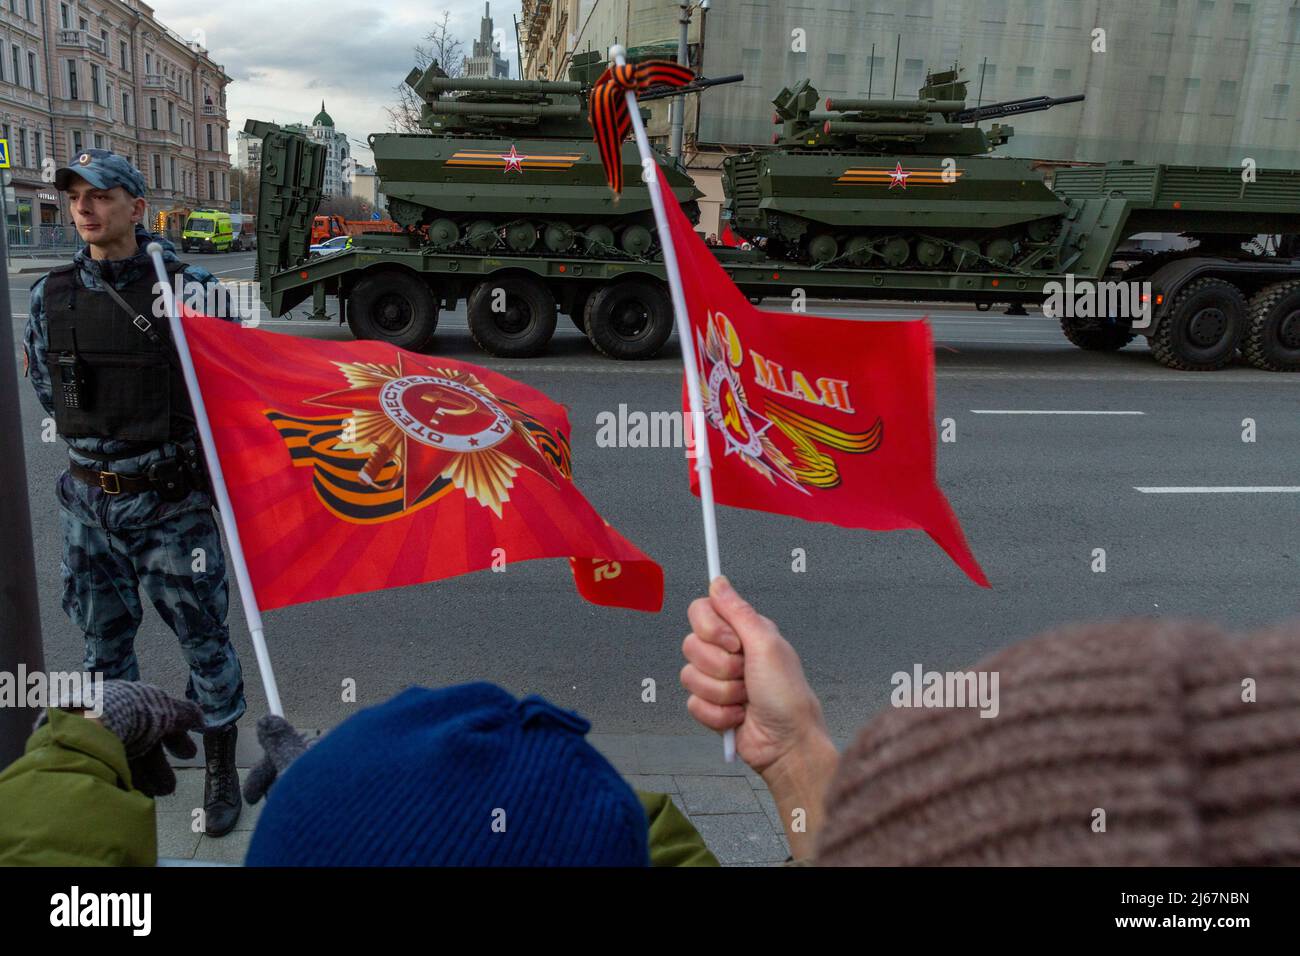 Moscow, Russia. 28th April, 2022. People watch military vehicles in Tverskaya Street as military hardware heads to Red Square for a rehearsal of the upcoming May 9 Victory Day parade marking the 77th anniversary of the victory over Nazi Germany in World War II. Credit: Nikolay Vinokurov/Alamy Live News Stock Photo